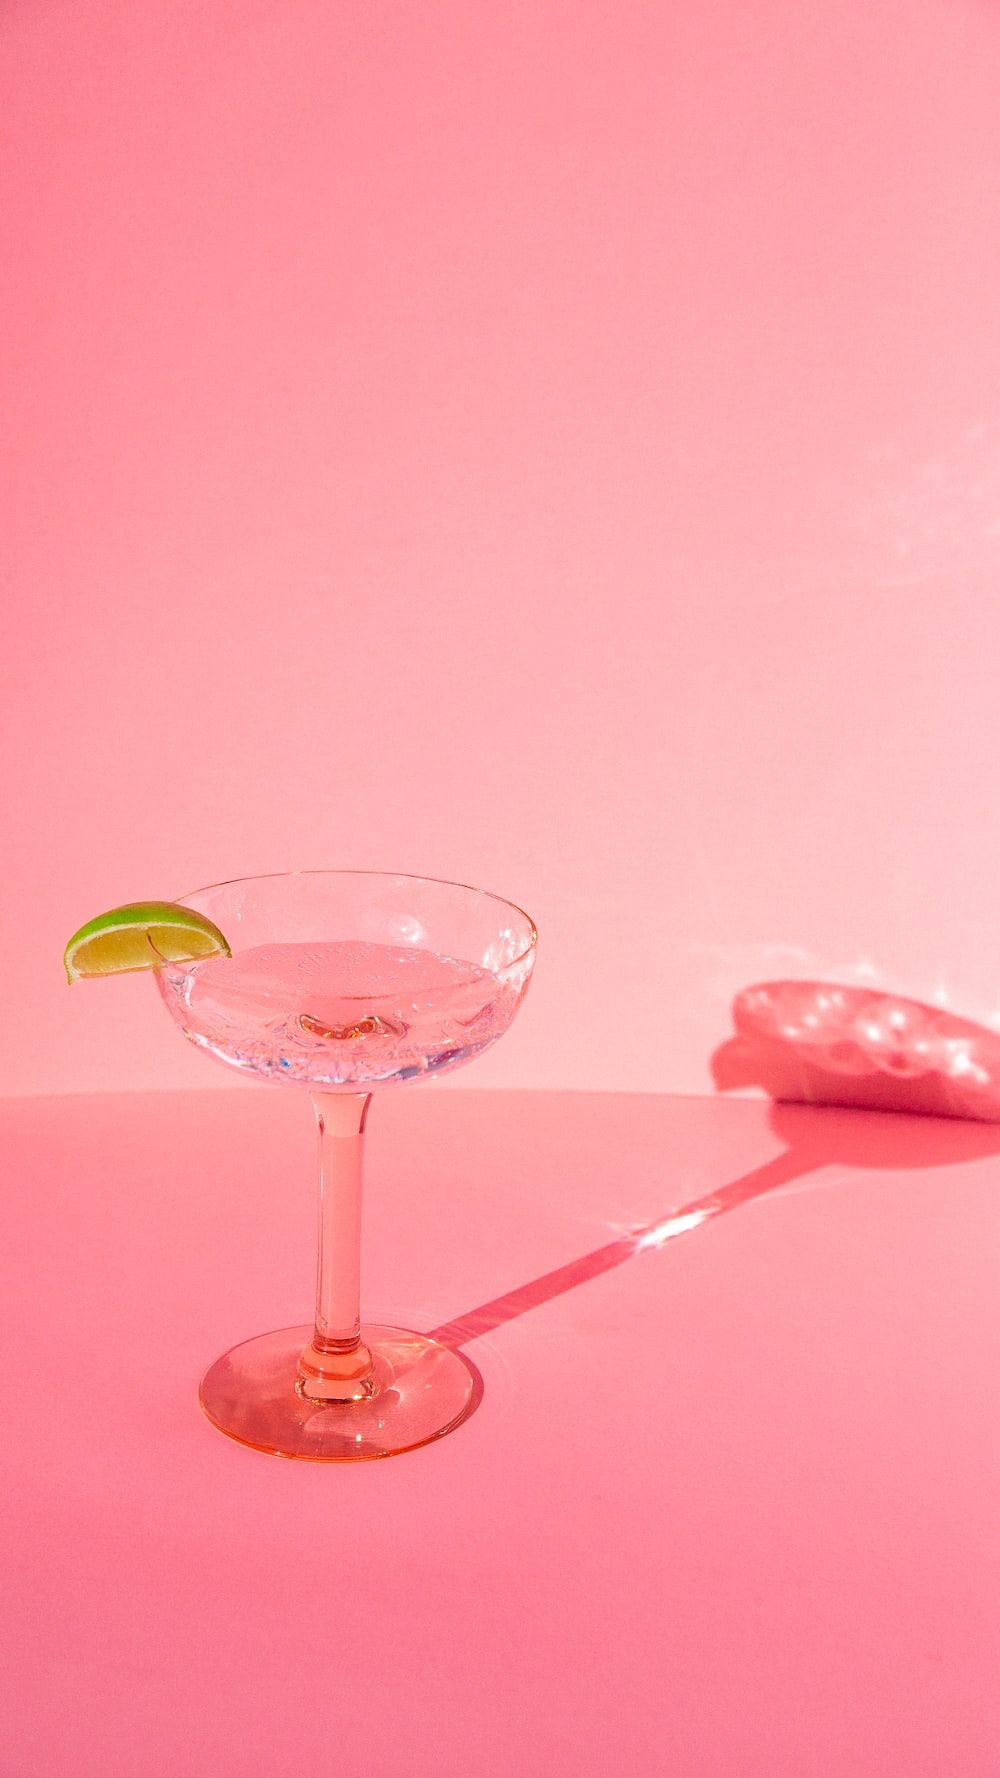 A martini glass with lime on the rim - Champagne